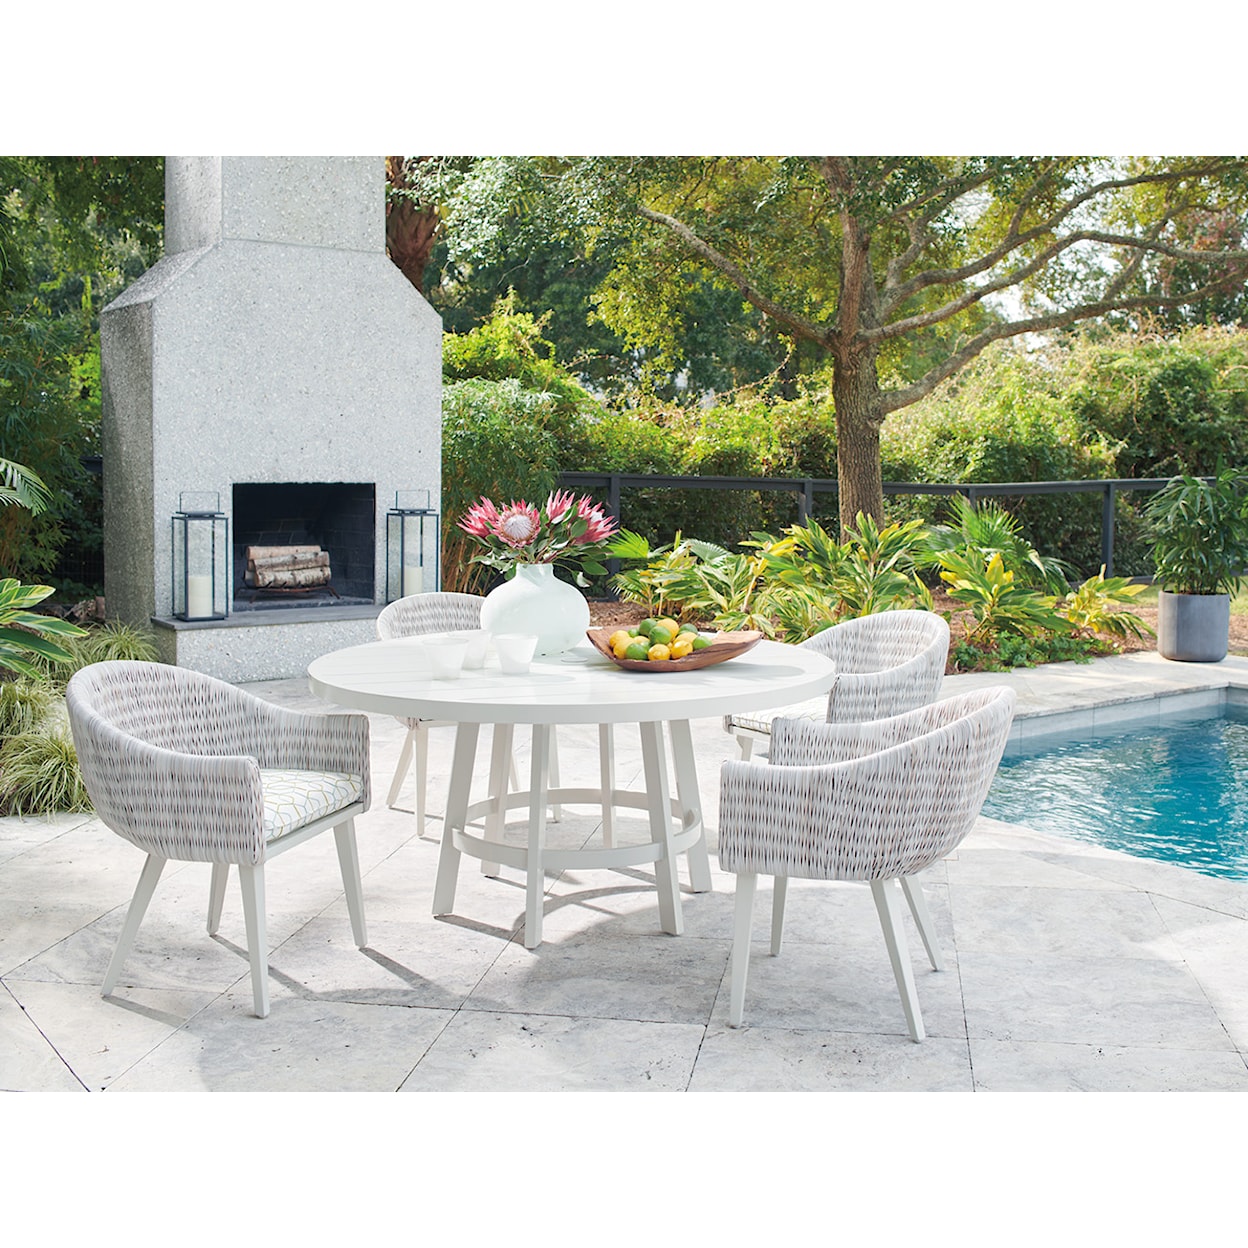 Tommy Bahama Outdoor Living Seabrook 5-Piece Outdoor Coastal Dining Set